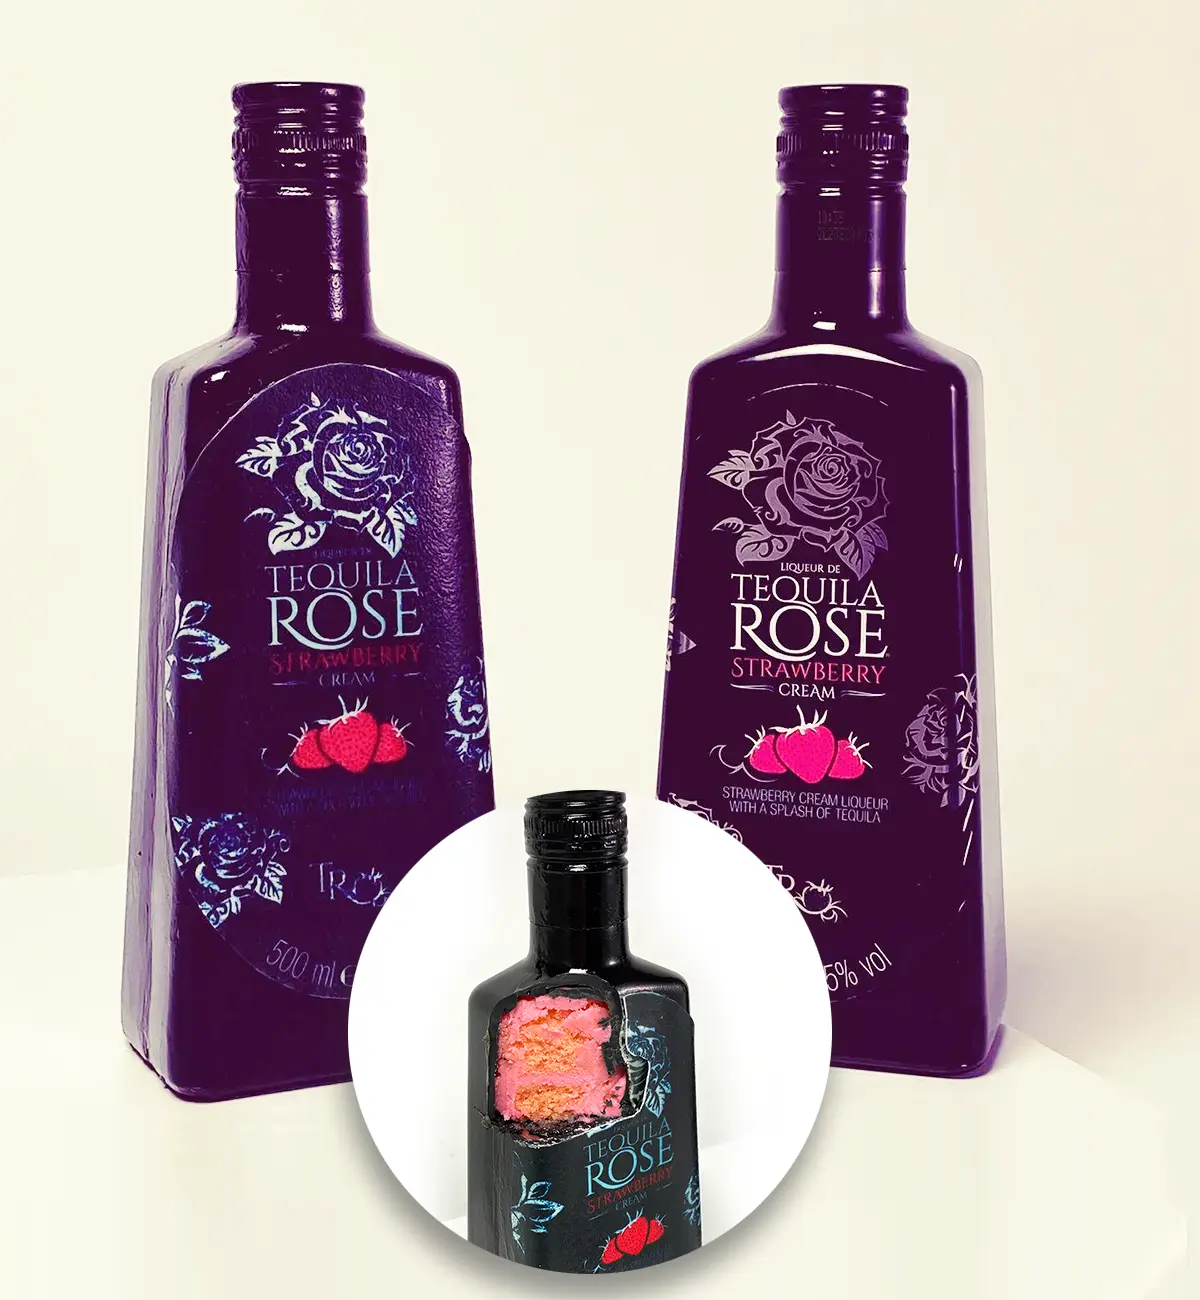 Tequila Rose cake and the real bottle